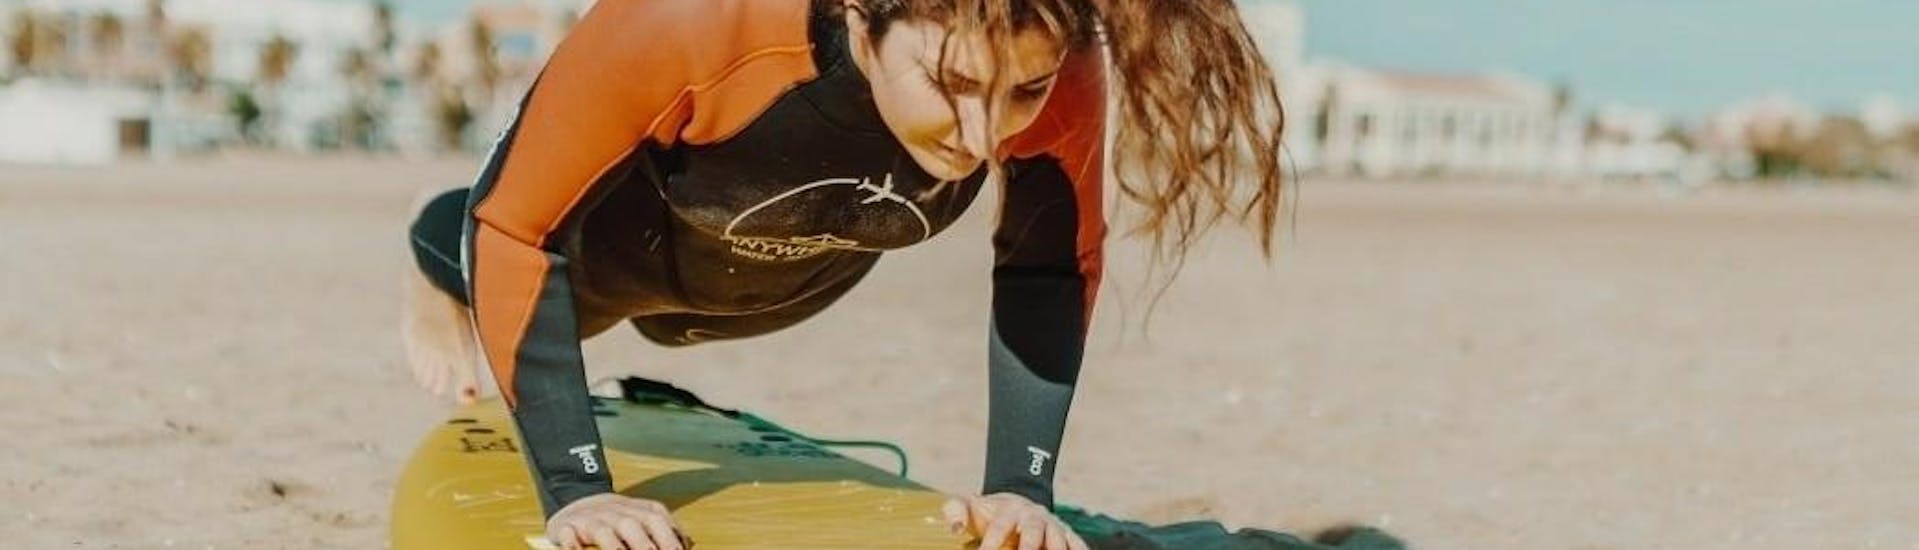 private-surfing-lessons-in-valencia---all-levels-hero-1